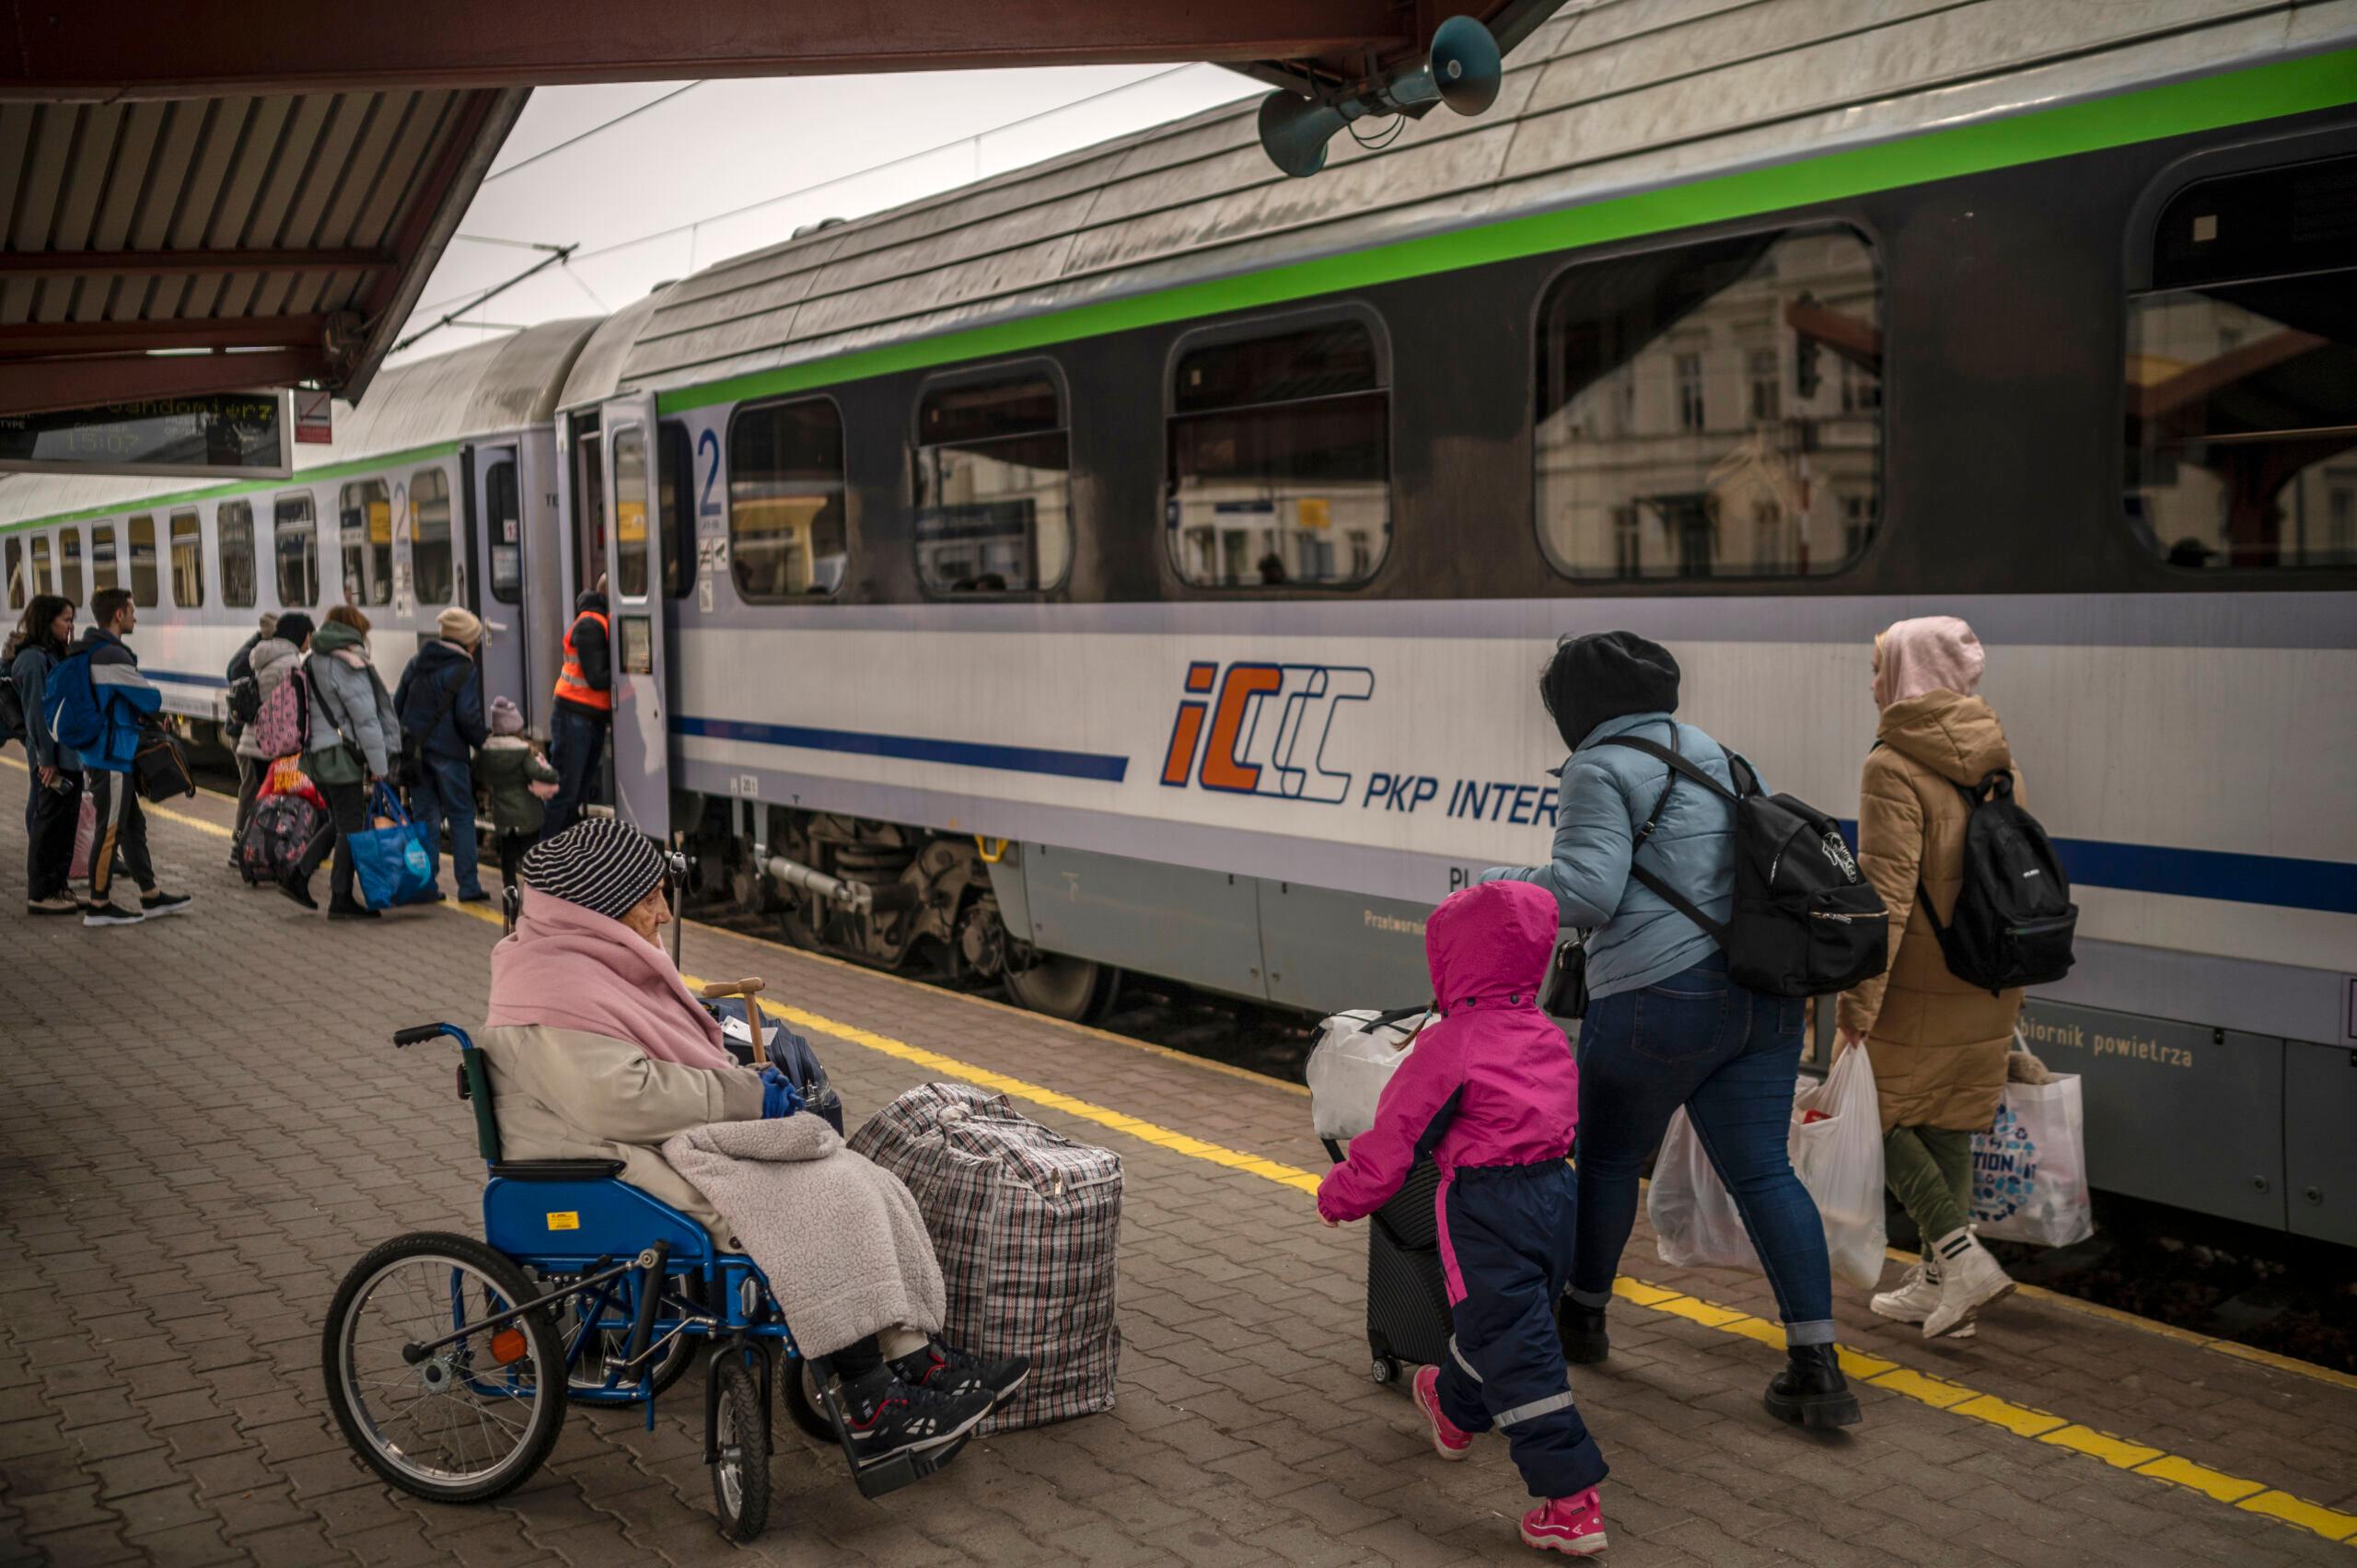 A Ukrainian evacuee in a wheelchair waits to board a train en route to Warsaw at the rail station in Przemysl, near the Polish-Ukrainian border, on March 29, 2022, on the 34th day of the Russian invasion of Ukraine. - Ukraine is calling for an "international agreement" to guarantee its security, which would be signed by several guarantor countries, said on March 29, 2022 the Ukrainian chief negotiator after several hours of Russian-Ukrainian talks in Istanbul. (Photo by Angelos Tzortzinis / AFP)